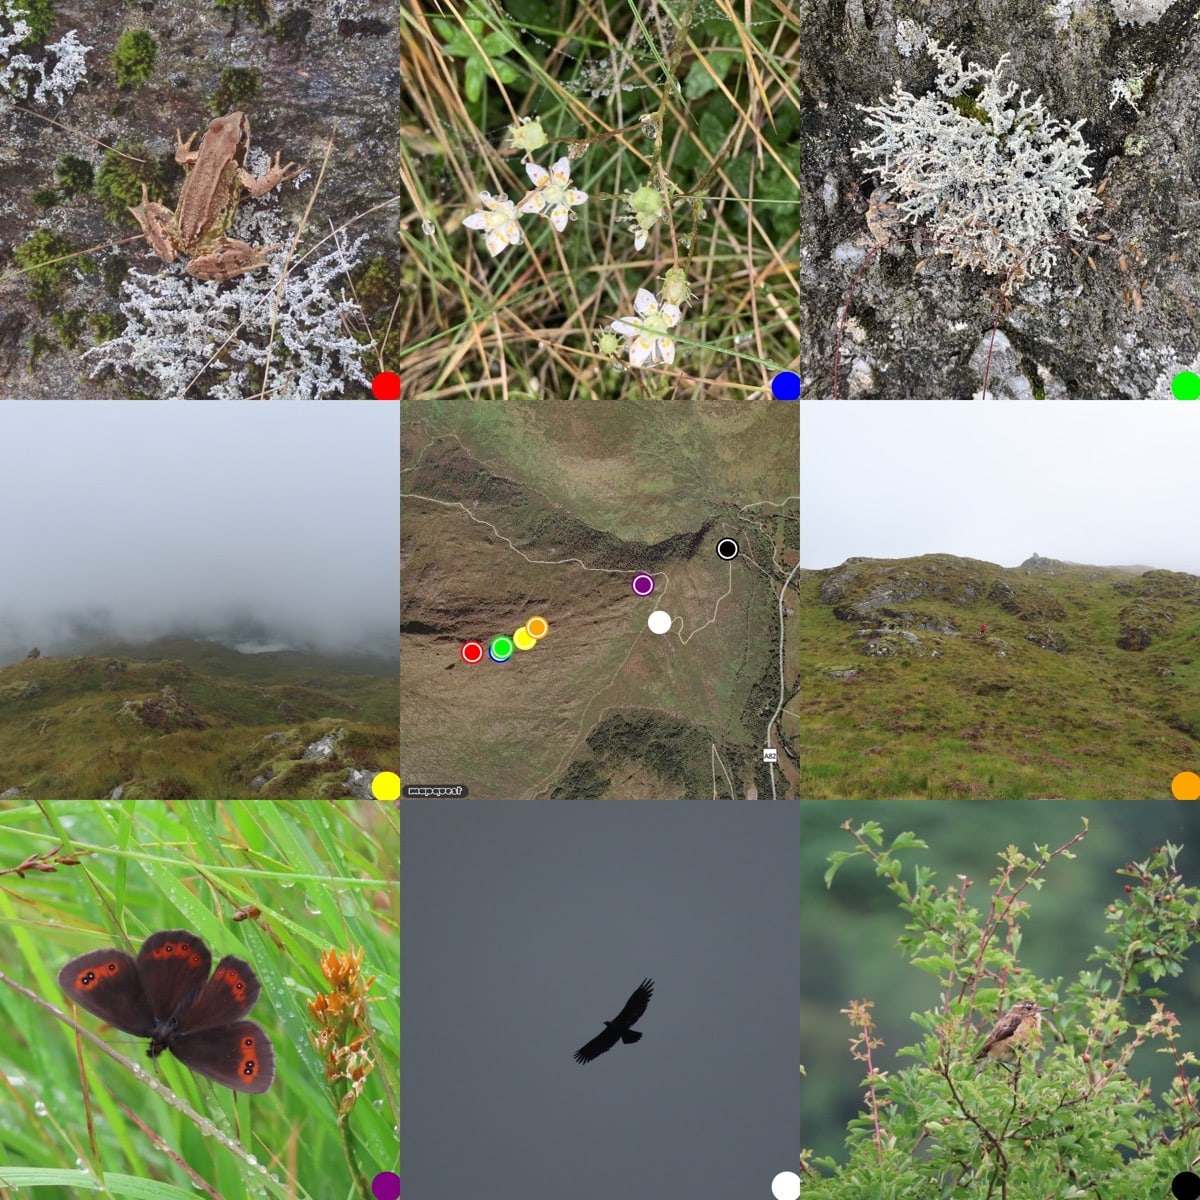 3x3 grid of pictures, photos round a map of where they were taken. From Top left: Frog; Starry Saxifrage; litchen; low clouds; map; christine decending Troisgeach; Scotch Argus Butterfly. Eagle; stonechat in bush.